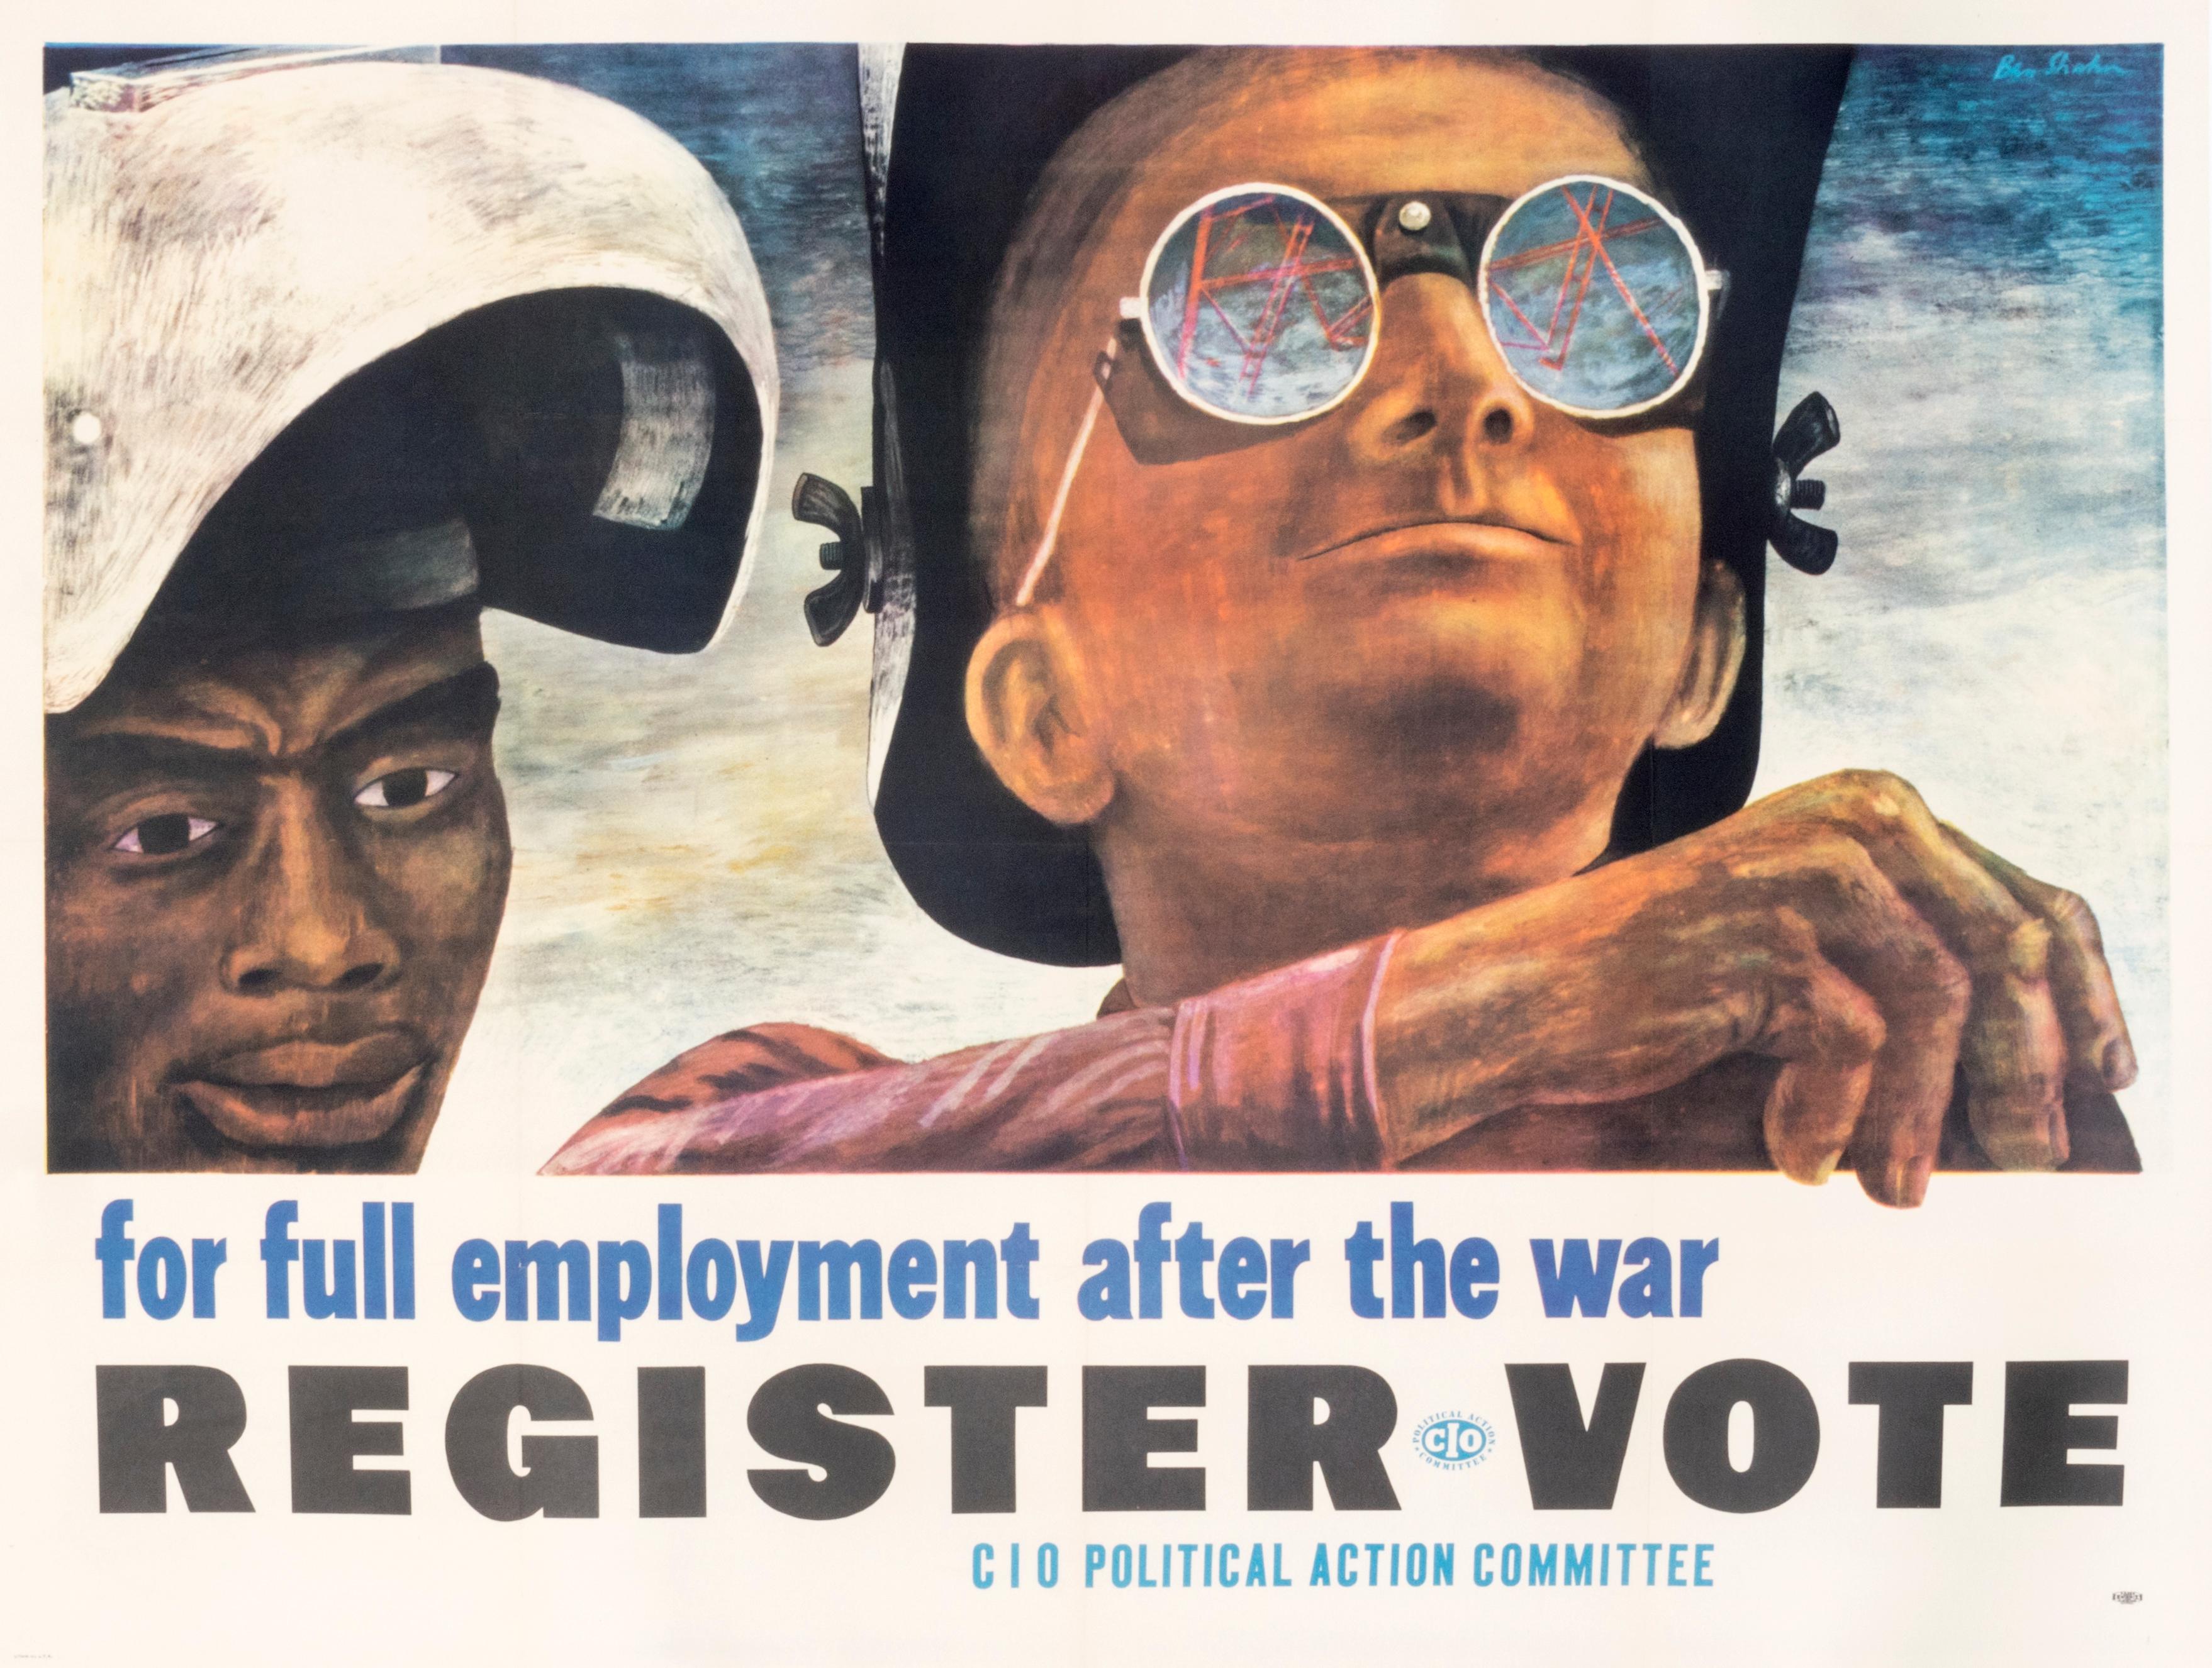 "For Full Employment After the War" Original Vintage Labor Poster - Print by Ben Shahn